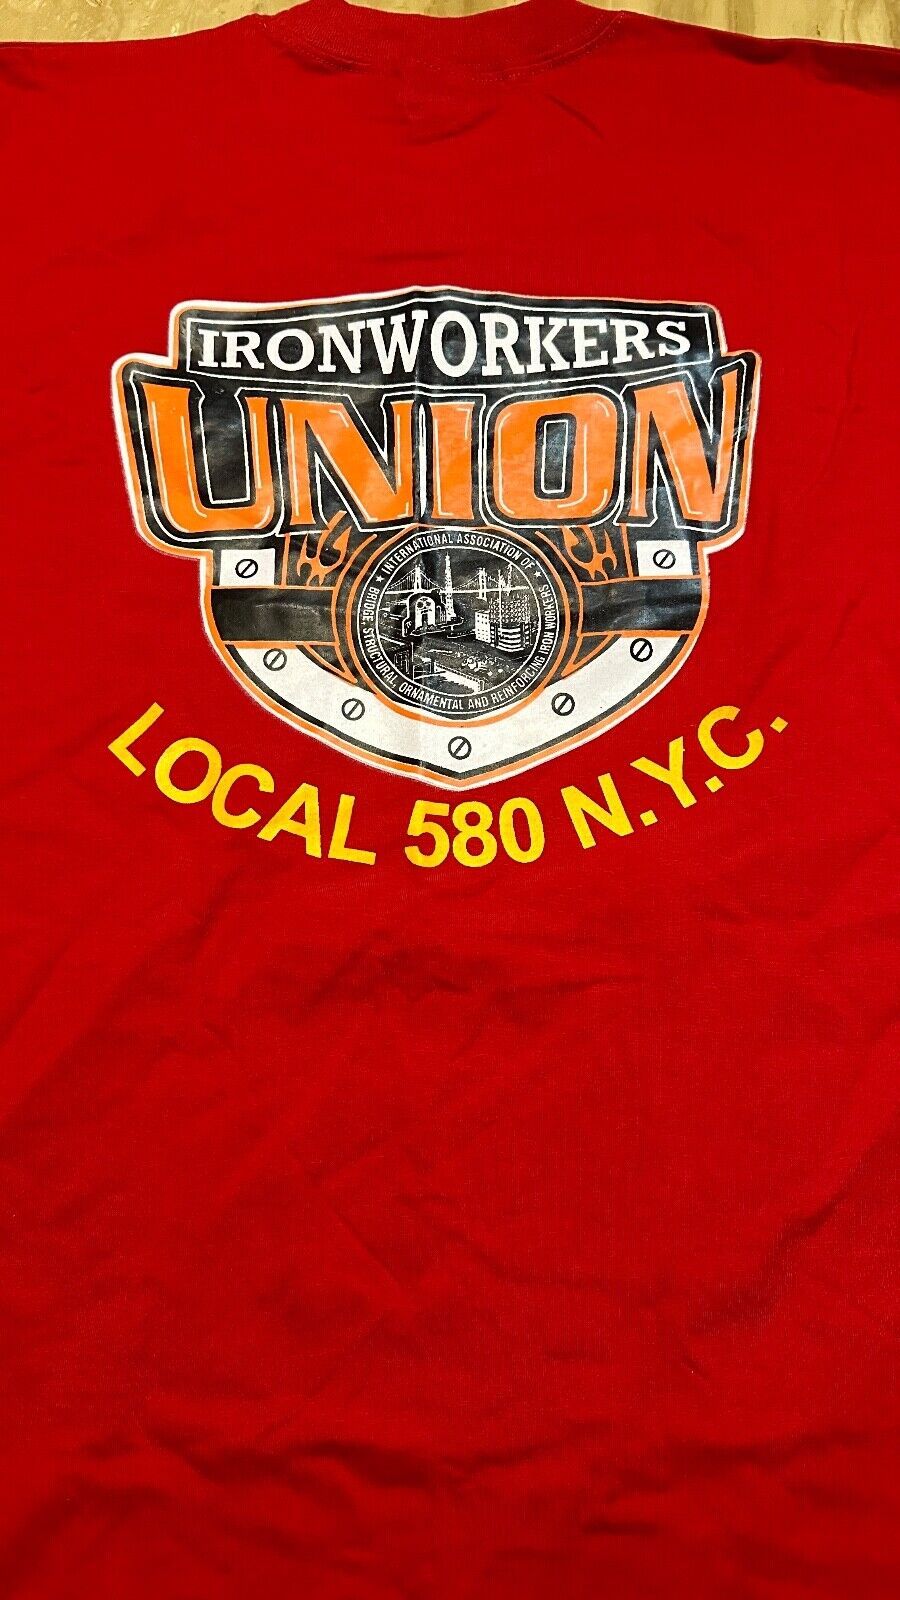 Ironworkers Local 580 New York City VINTAGE Labor Union Shirt NEW